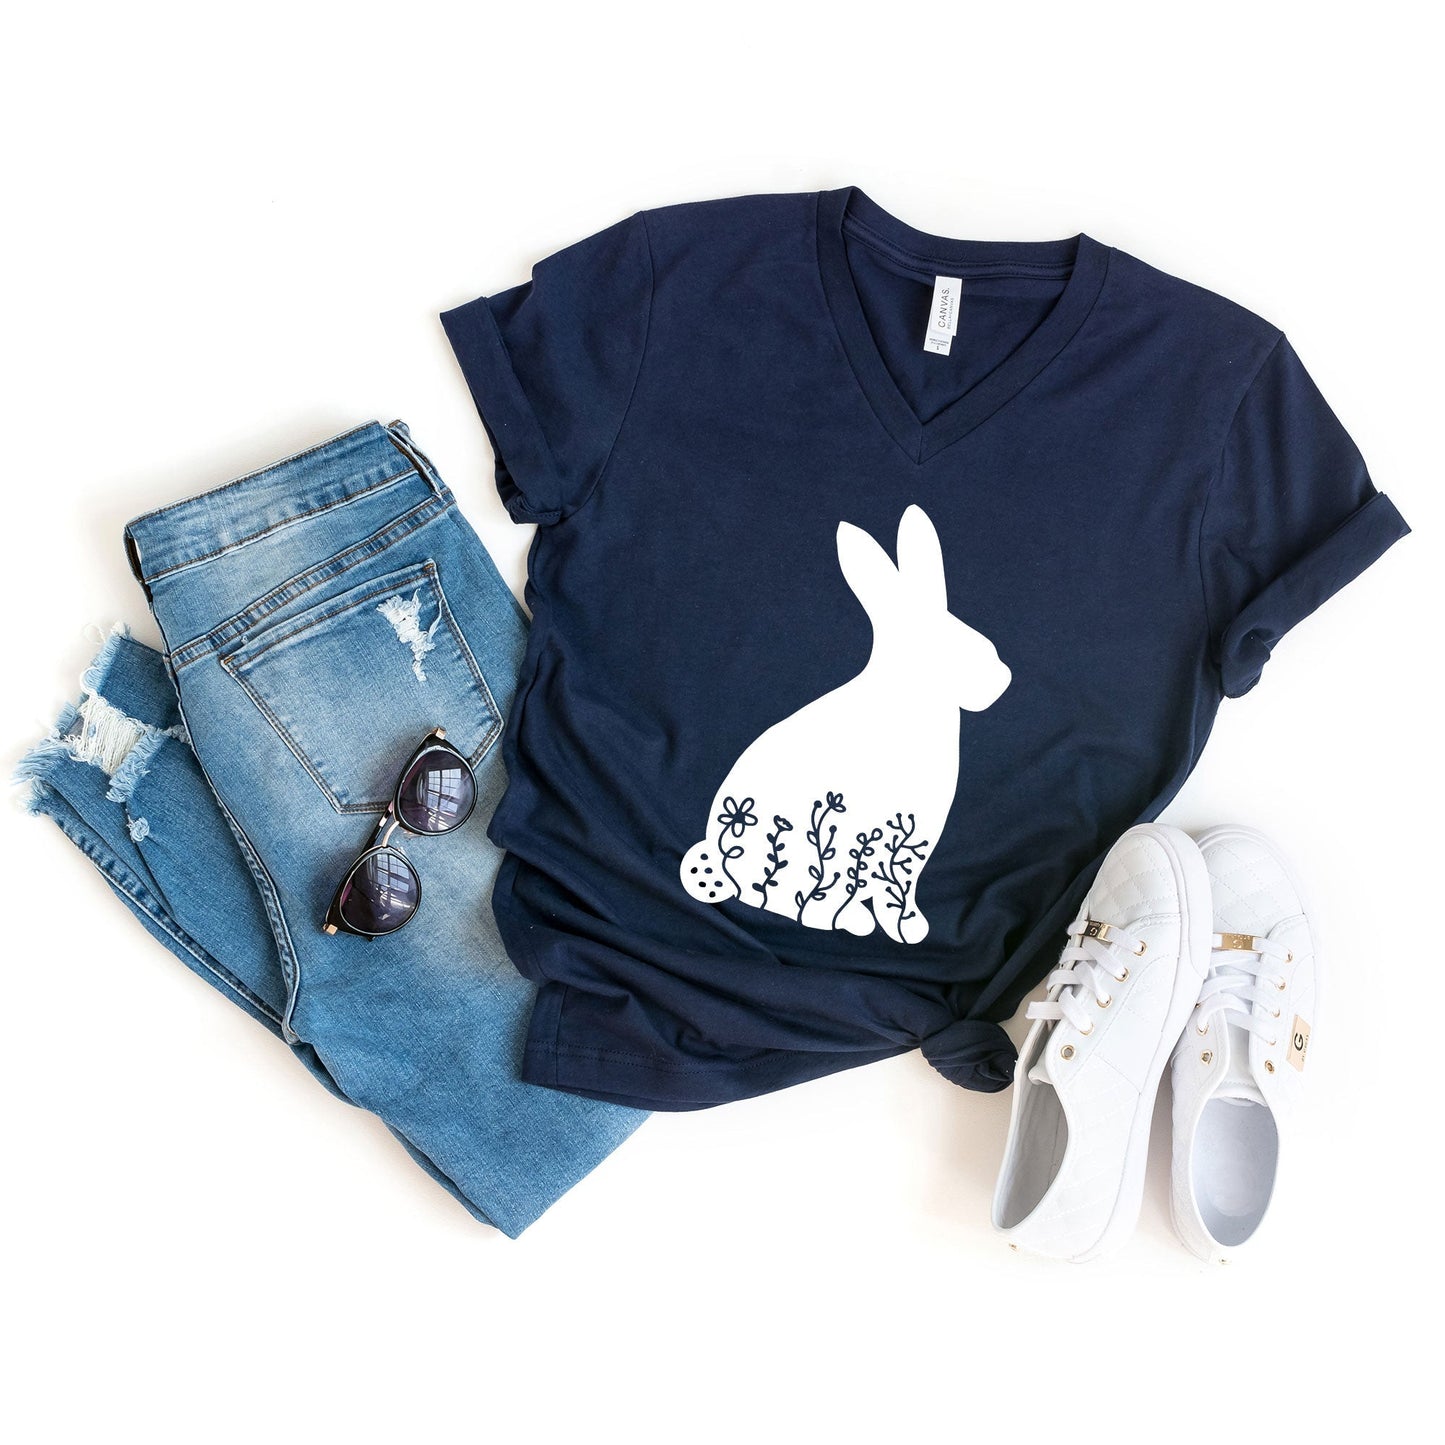 Bunny With Flowers | Short Sleeve V-Neck